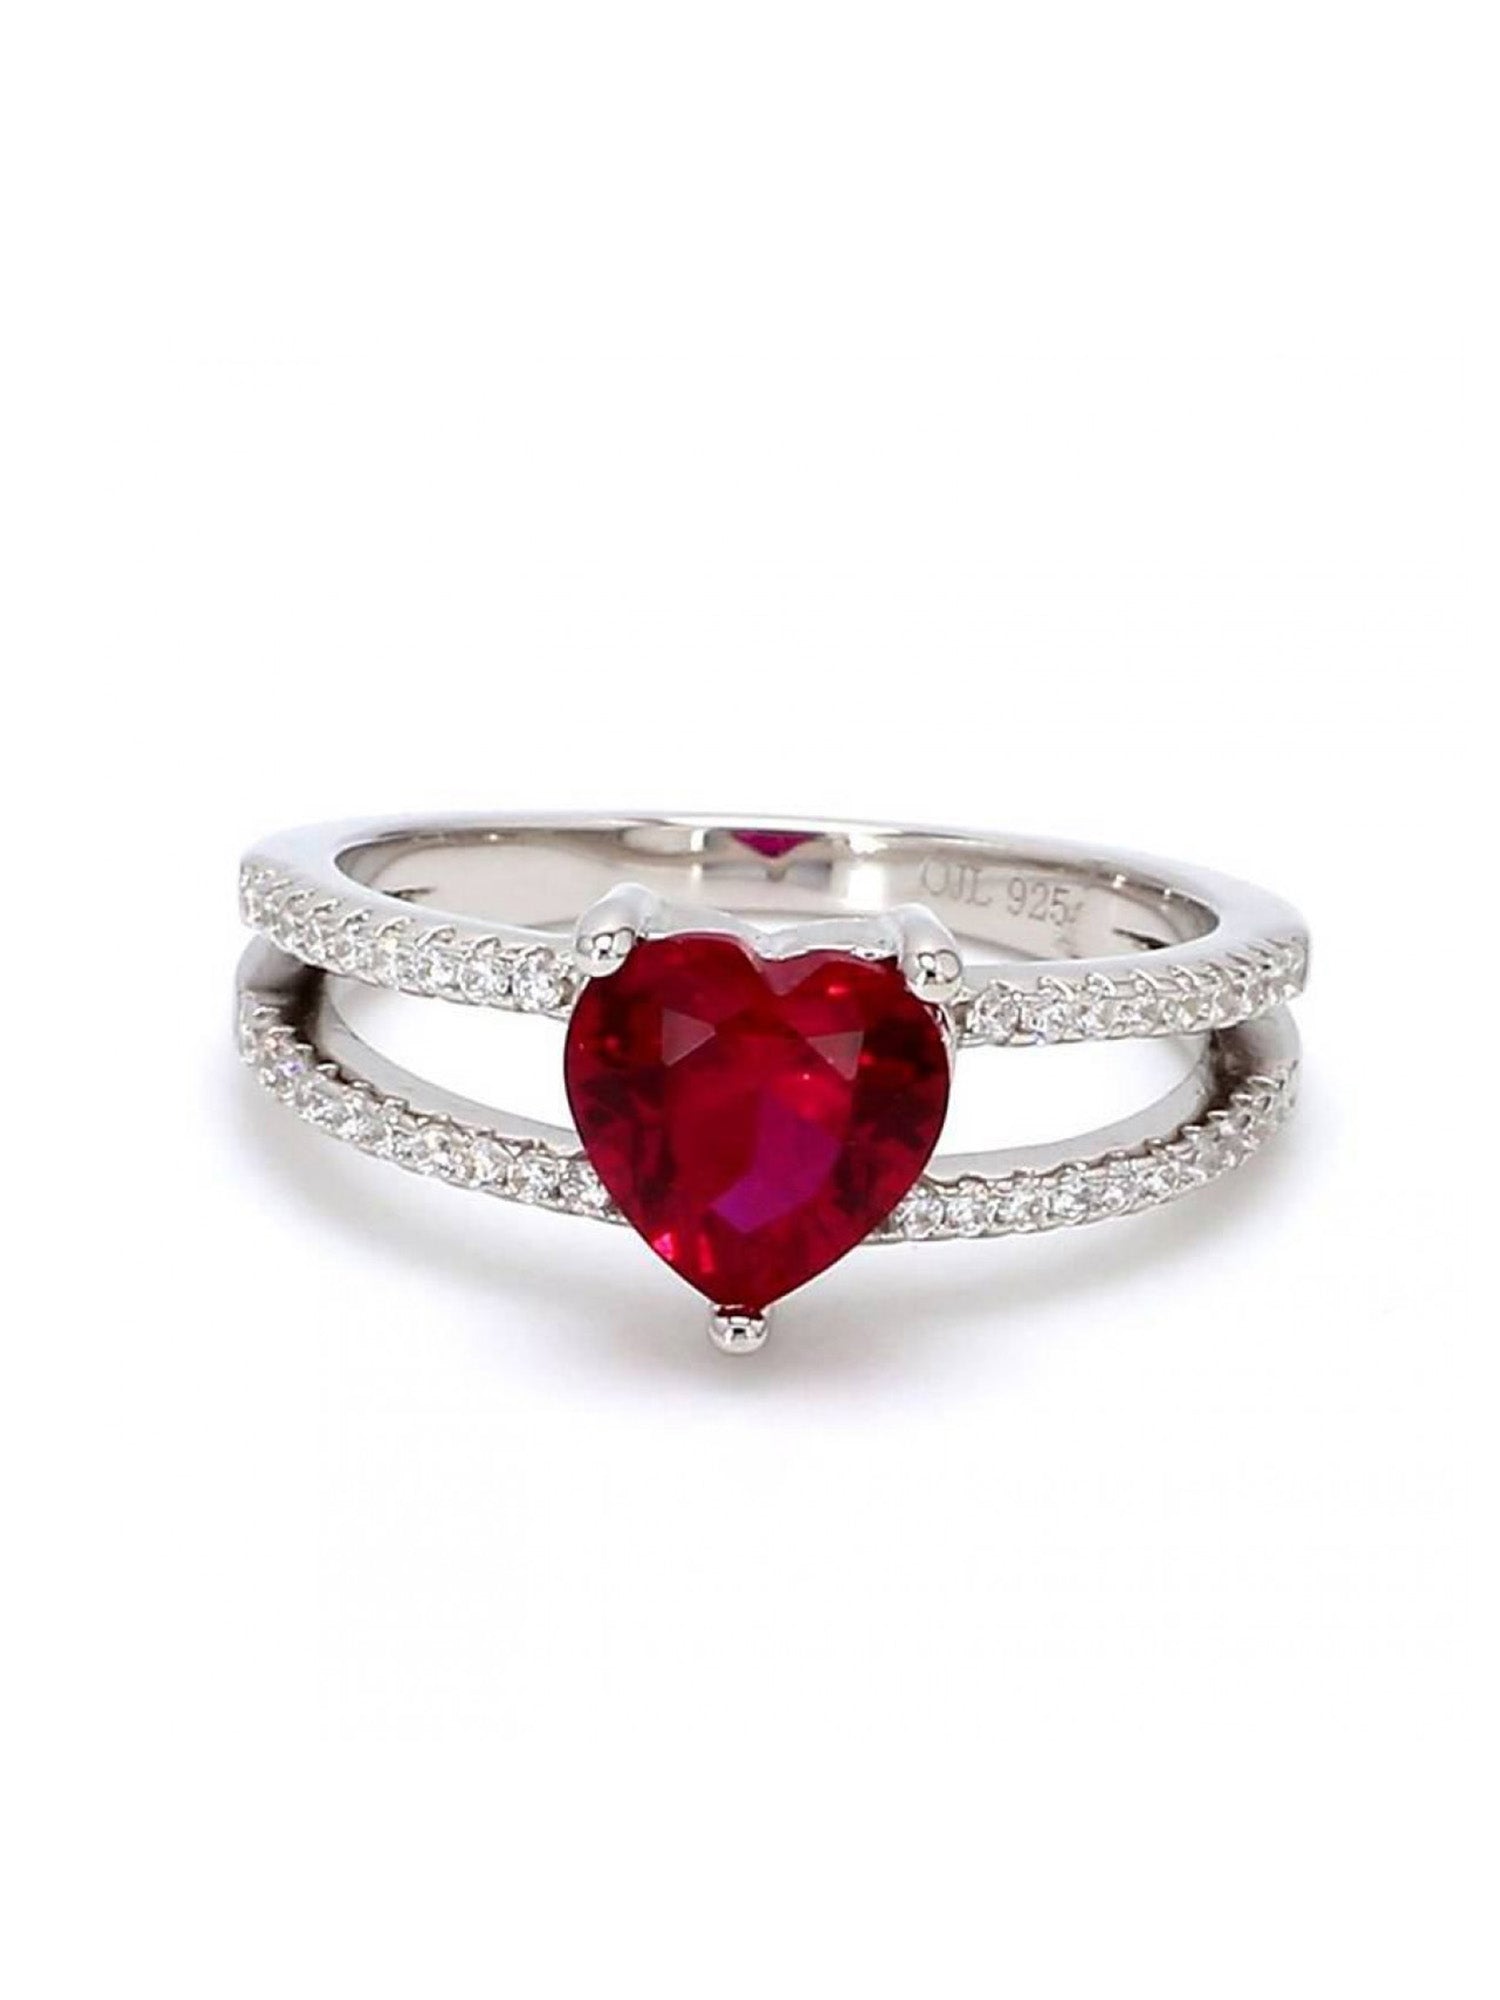 RED RUBY HEART RING IN 925 SILVER